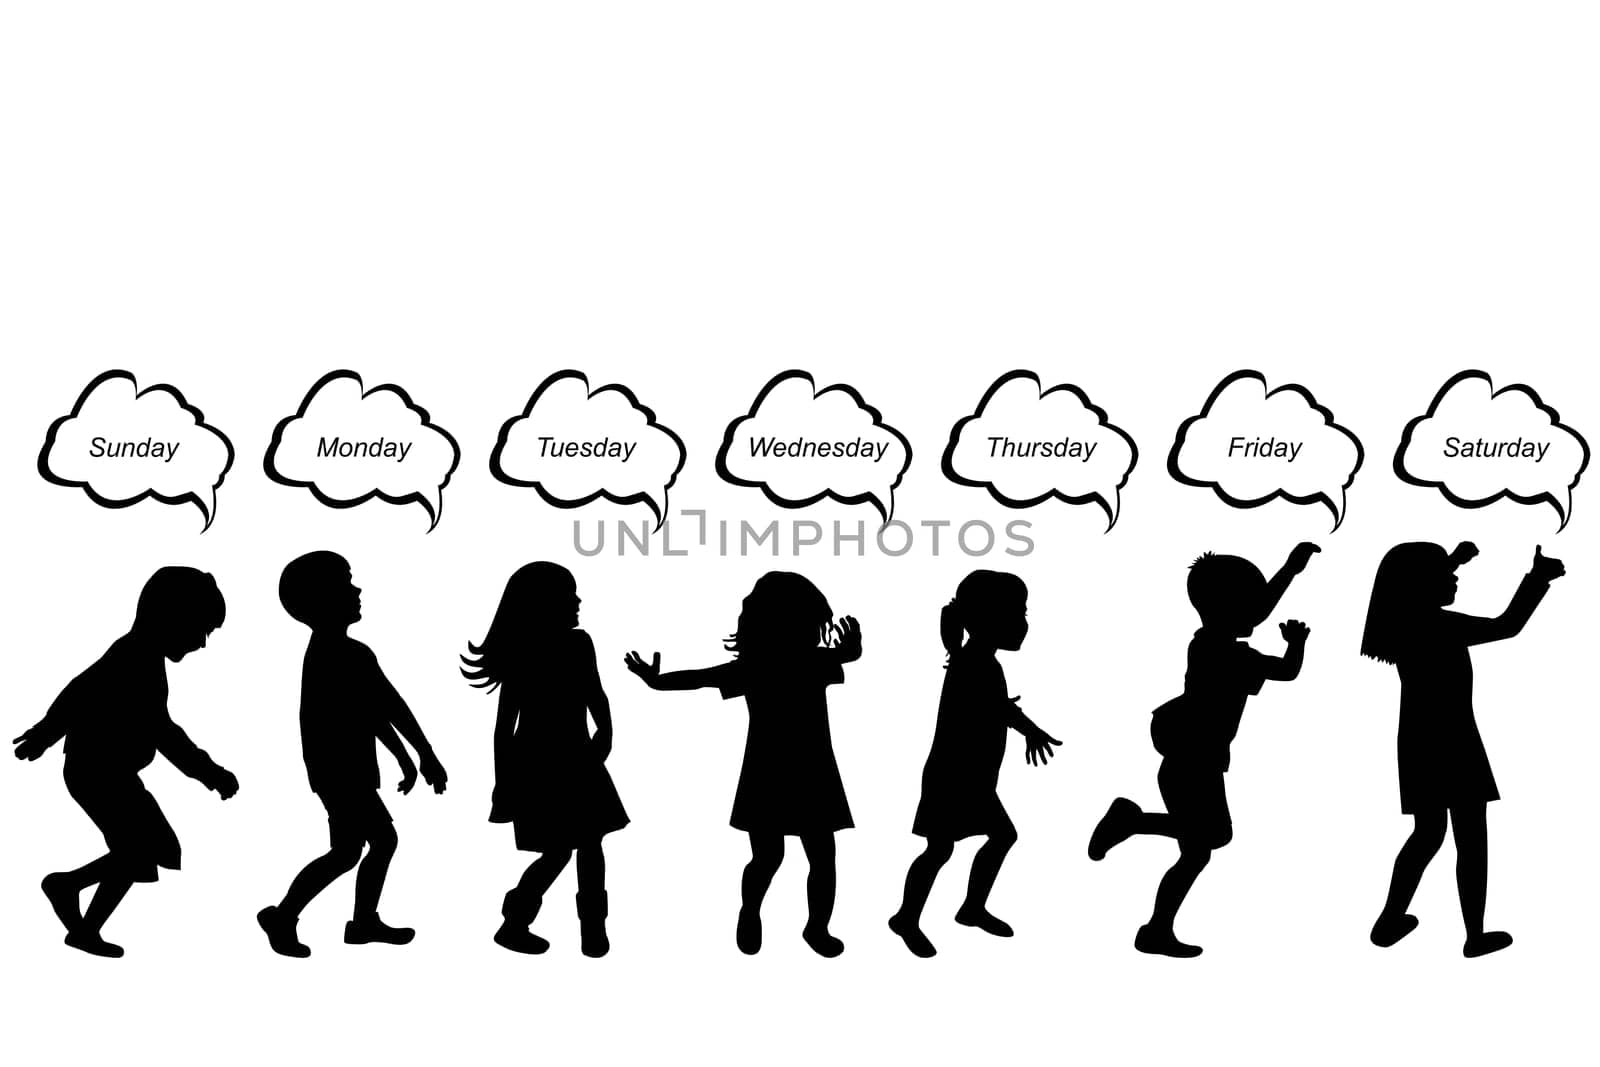 Silhouettes of kids with days of the week written in chat bubbles by hibrida13